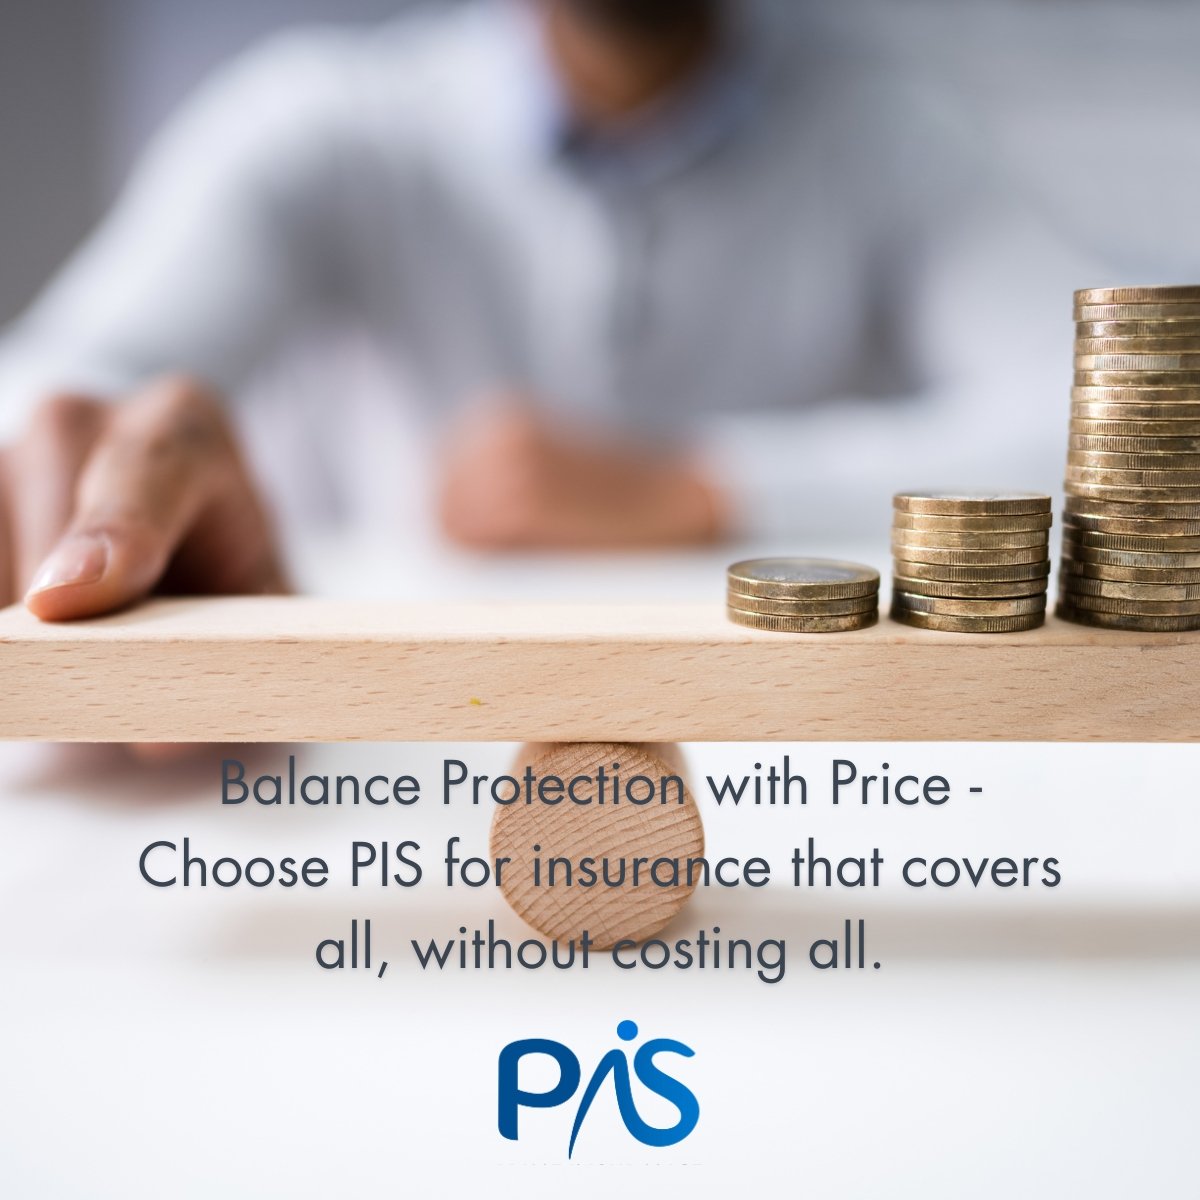 Discover the PIS edge: top-notch insurance at smart prices. Get comprehensive coverage designed for your budget. Choose protection that fits your life, not just your wallet. #SmartCoverage #PISLebanon #InsuranceExcellence #CompetitivePricing #QualityInsurance